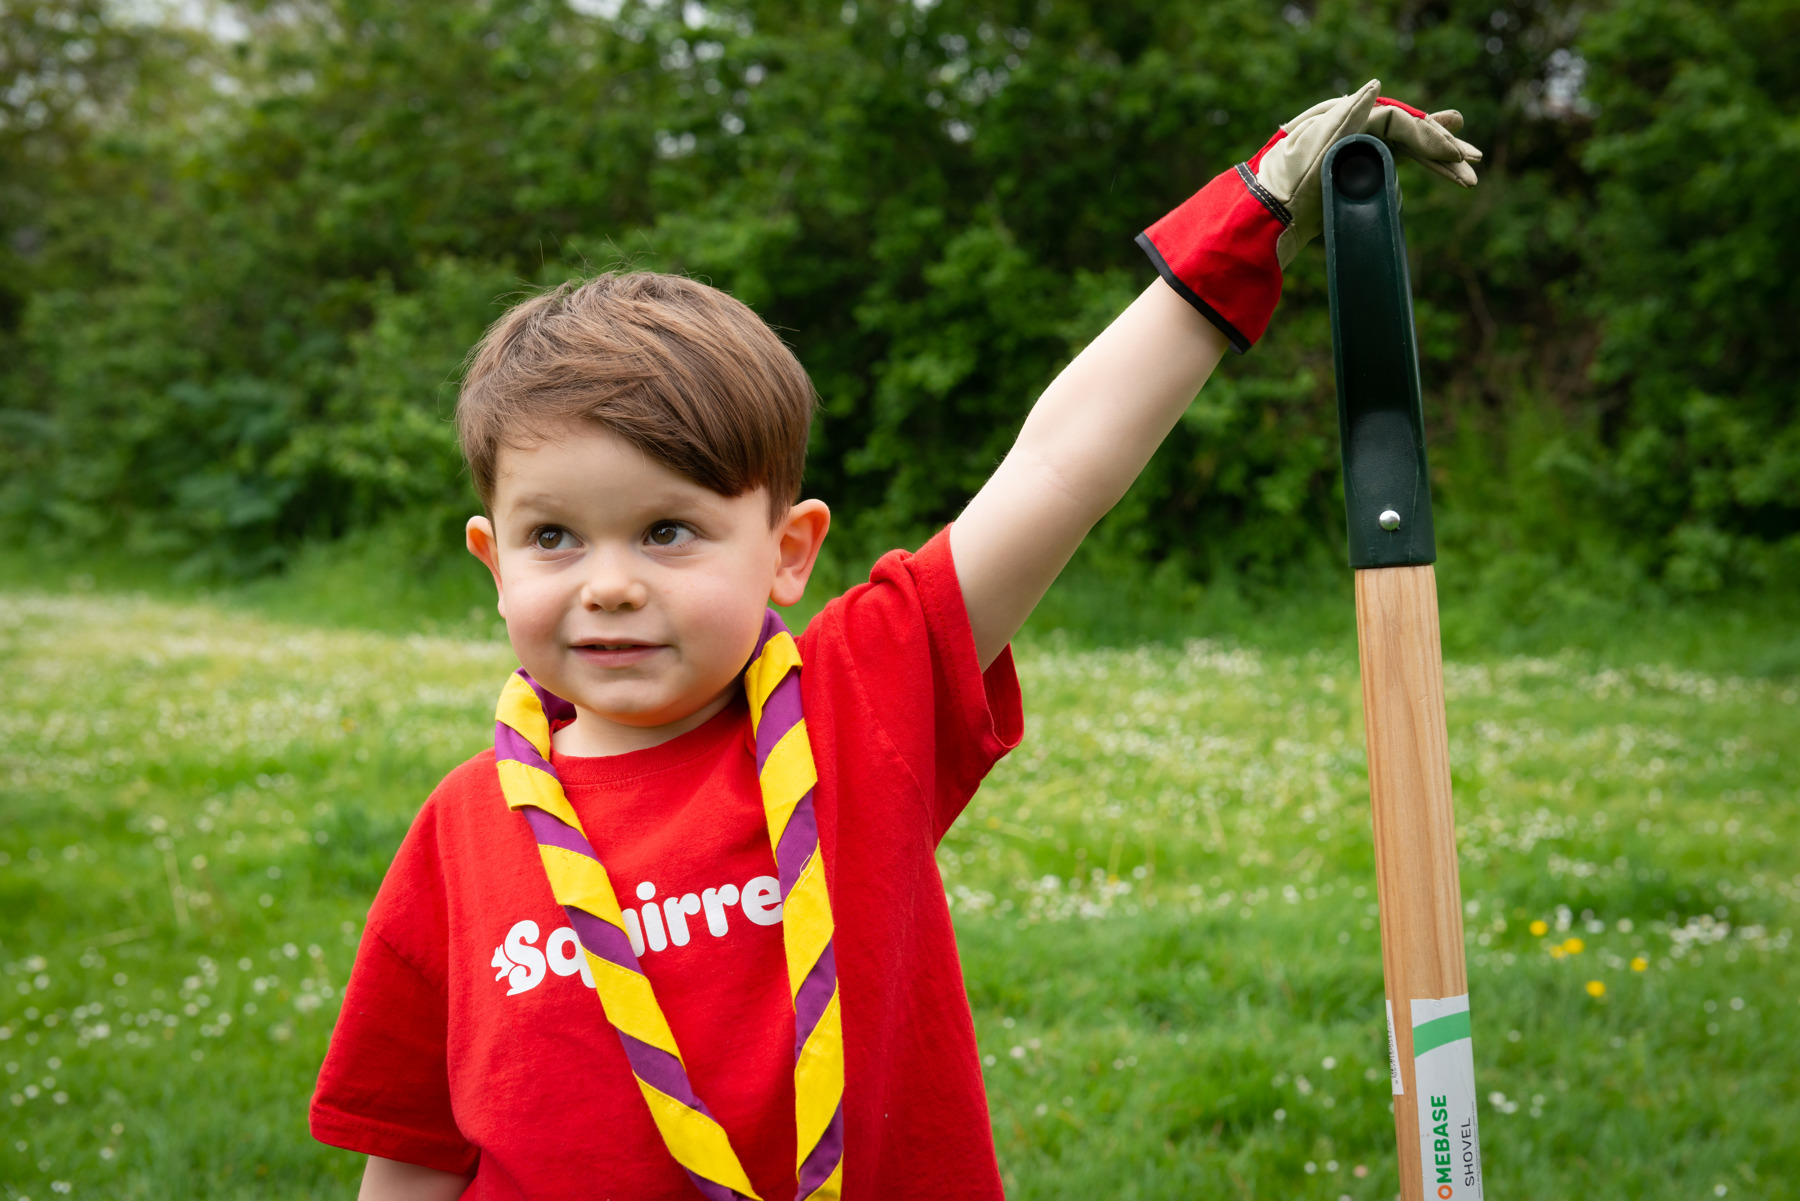 A Squirrel is standing on grass wearing a red Squirrels t-shirt and a red and yellow necker. Their left hand has a glove on and is holding the top of a spade.